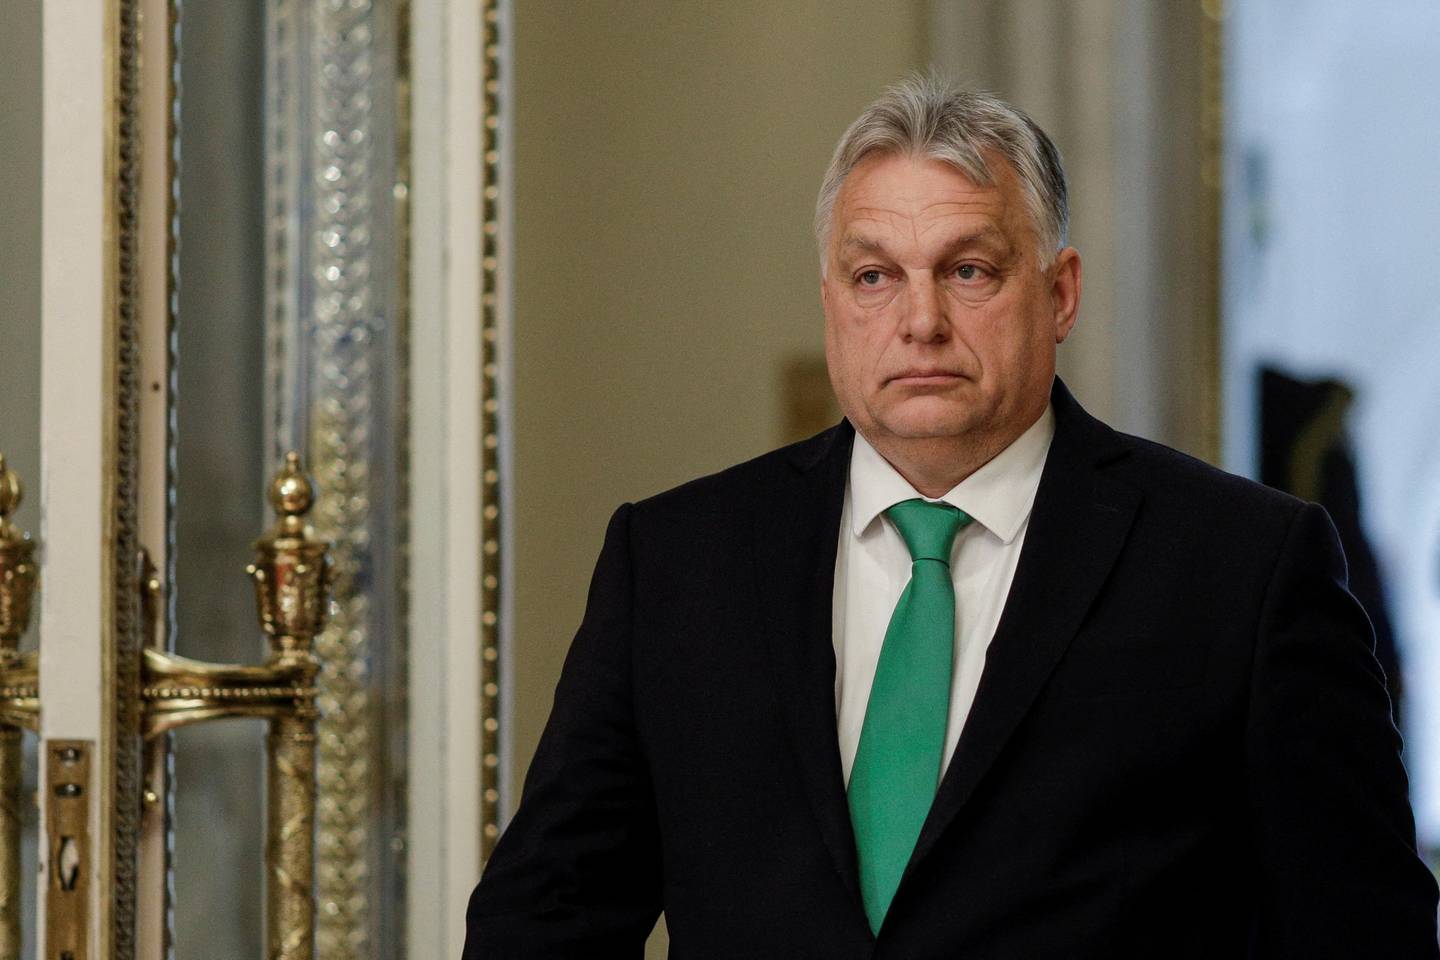 Hungarian Prime Minister Viktor Orban arrives for a meeting with EU leaders, in Bucharest, Romania, April 3, 2024. Inquam Photos/Octav Ganea via REUTERS ATTENTION EDITORS - THIS IMAGE WAS PROVIDED BY A THIRD PARTY. ROMANIA OUT. NO COMMERCIAL OR EDITORIAL SALES IN ROMANIA